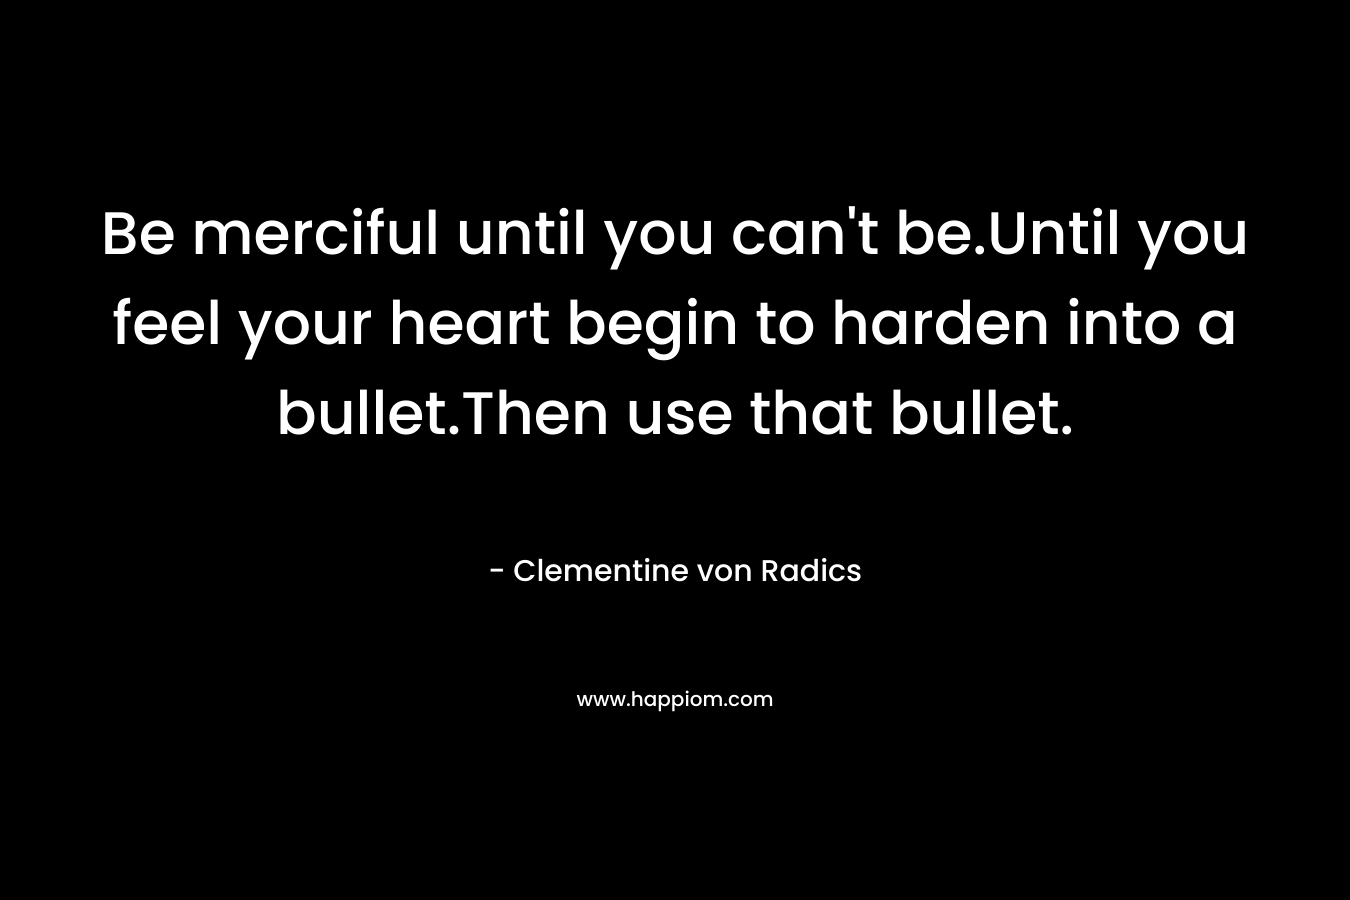 Be merciful until you can’t be.Until you feel your heart begin to harden into a bullet.Then use that bullet. – Clementine von Radics